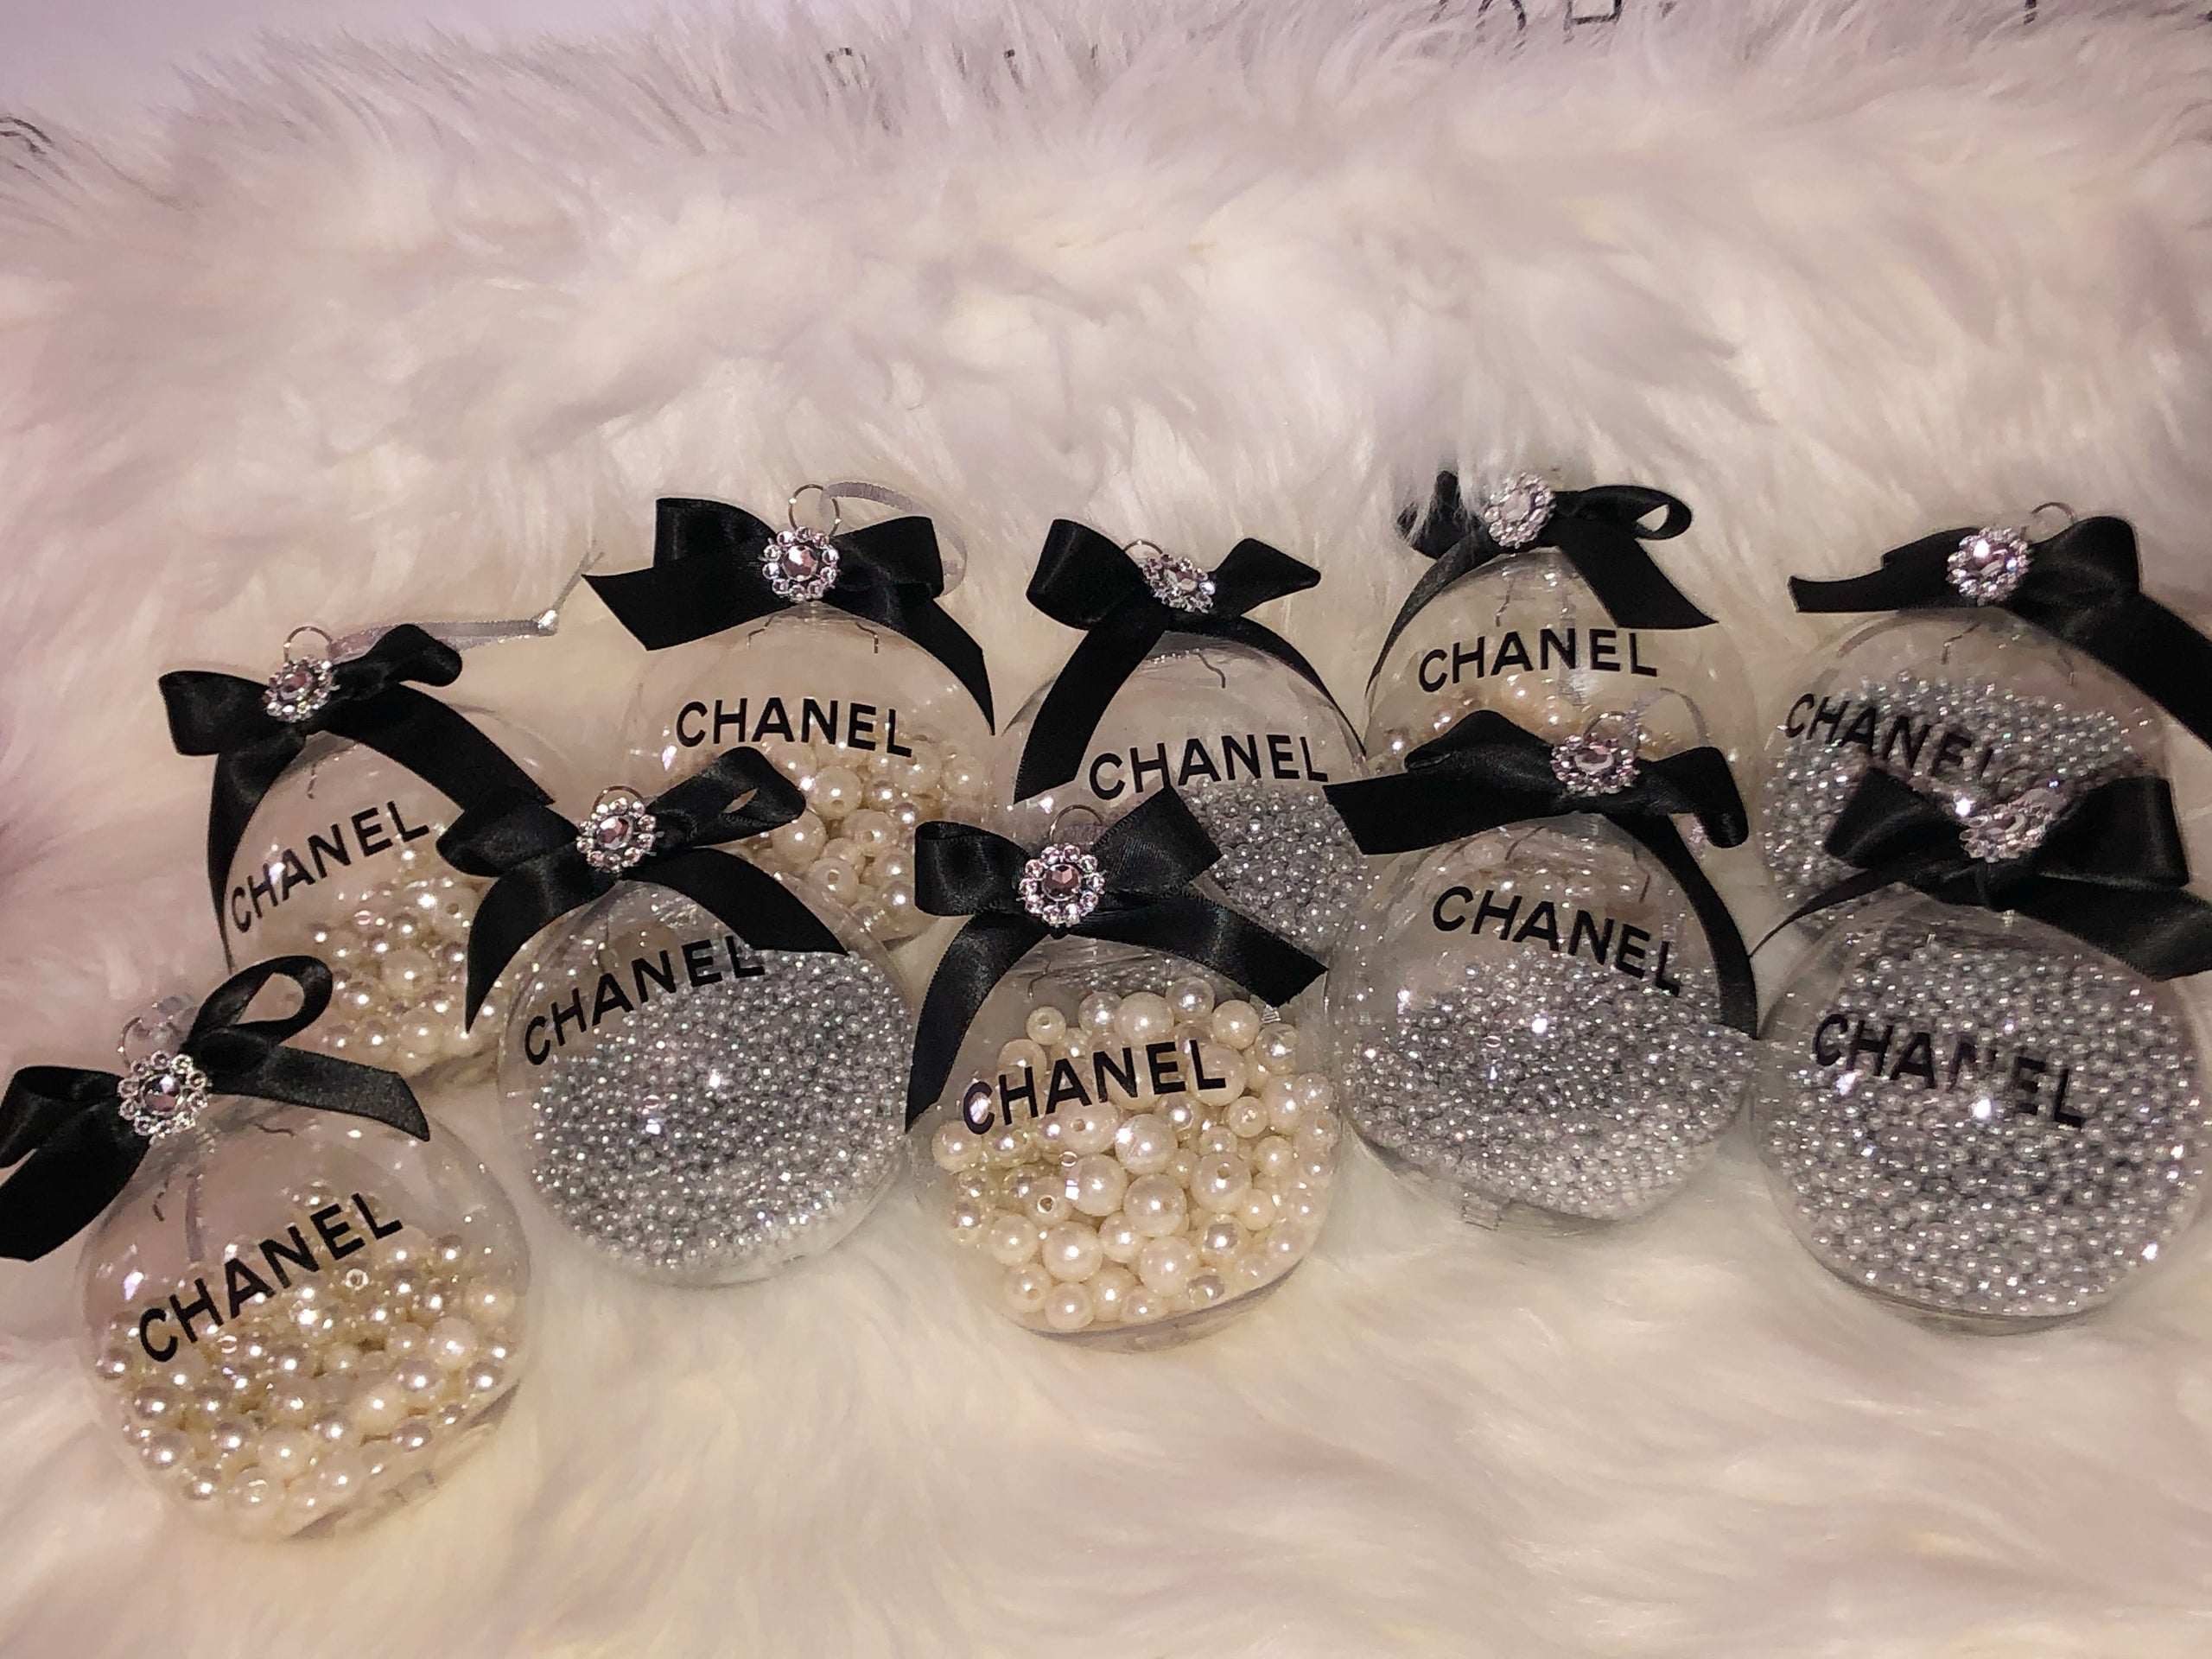 Chanel Inspired Ornaments